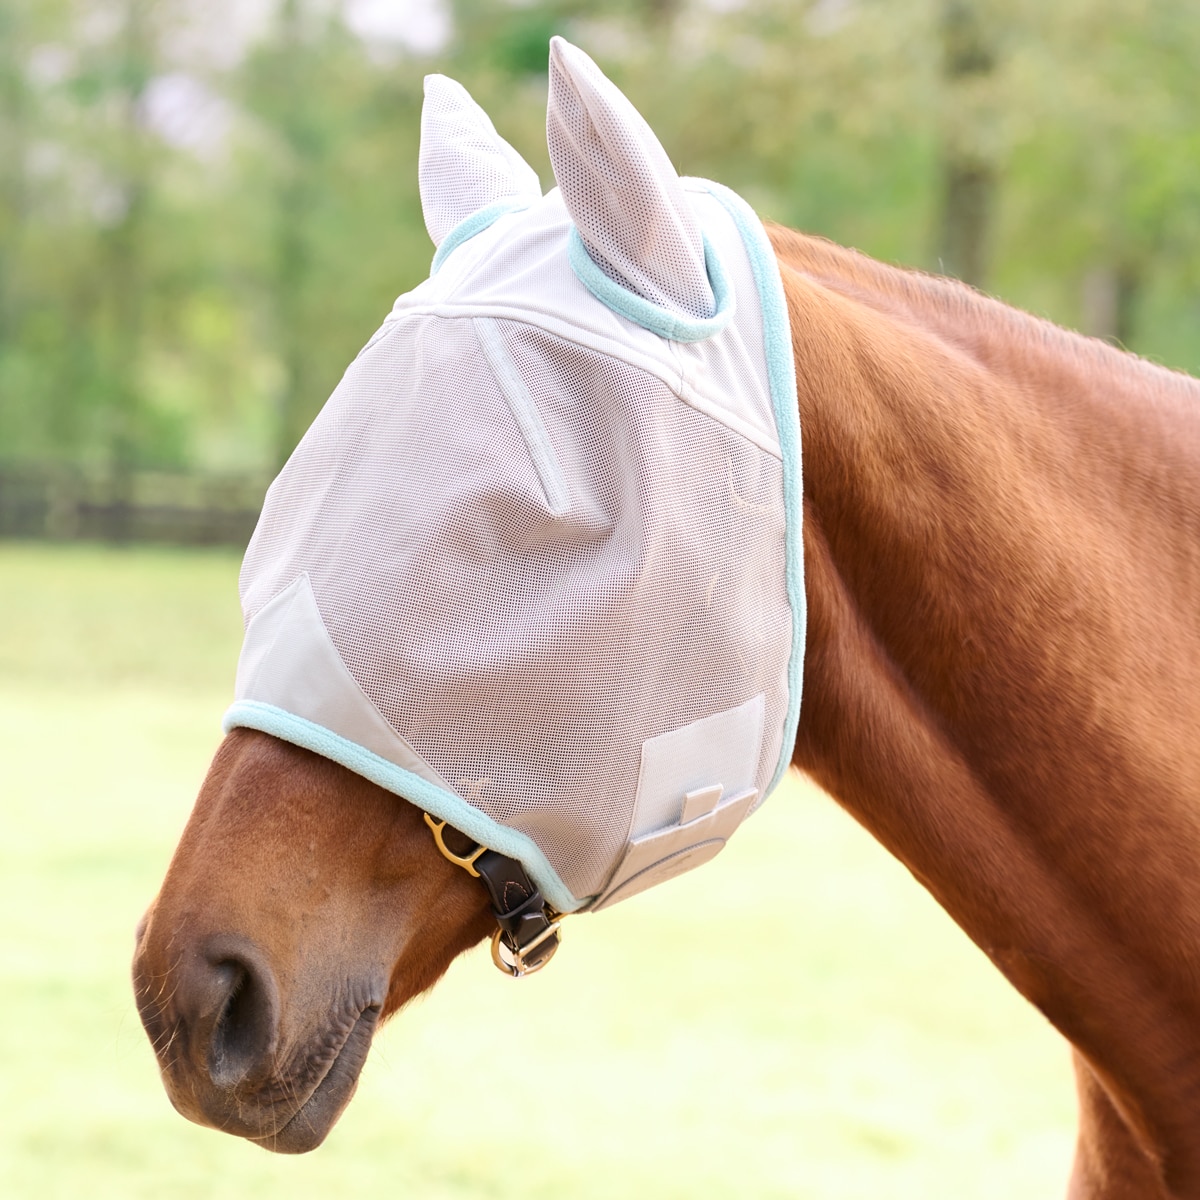 ETbotu Pet Supplies Breathable Anti Mosquito Horse Fly Mask with Ear for Summer blue M